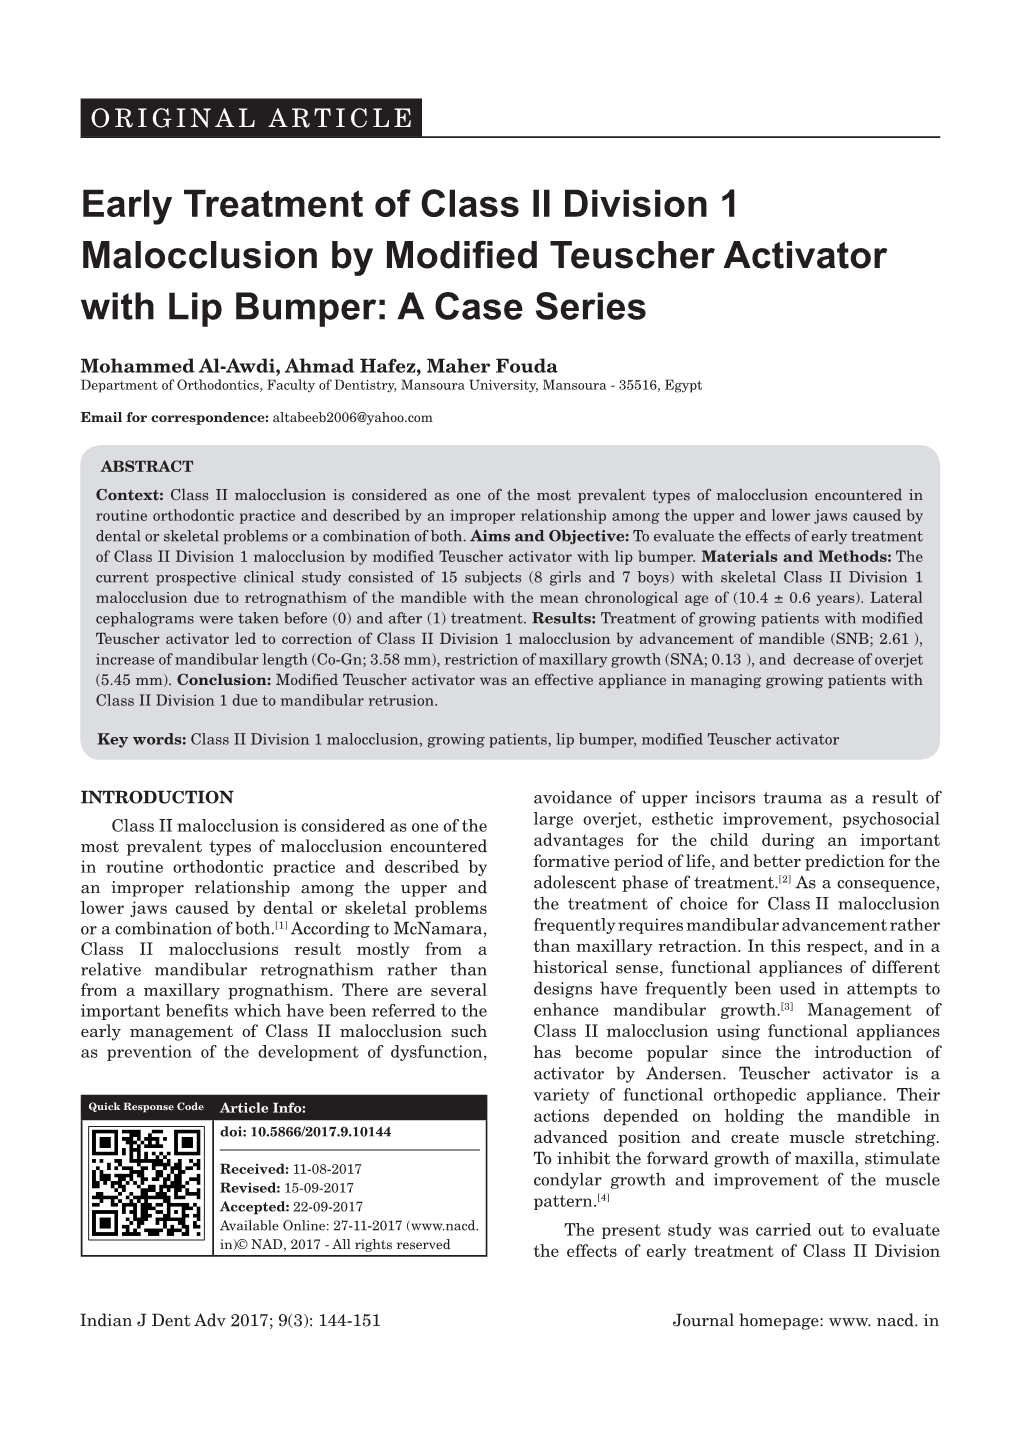 Early Treatment of Class II Division 1 Malocclusion by Modified Teuscher Activator with Lip Bumper: a Case Series